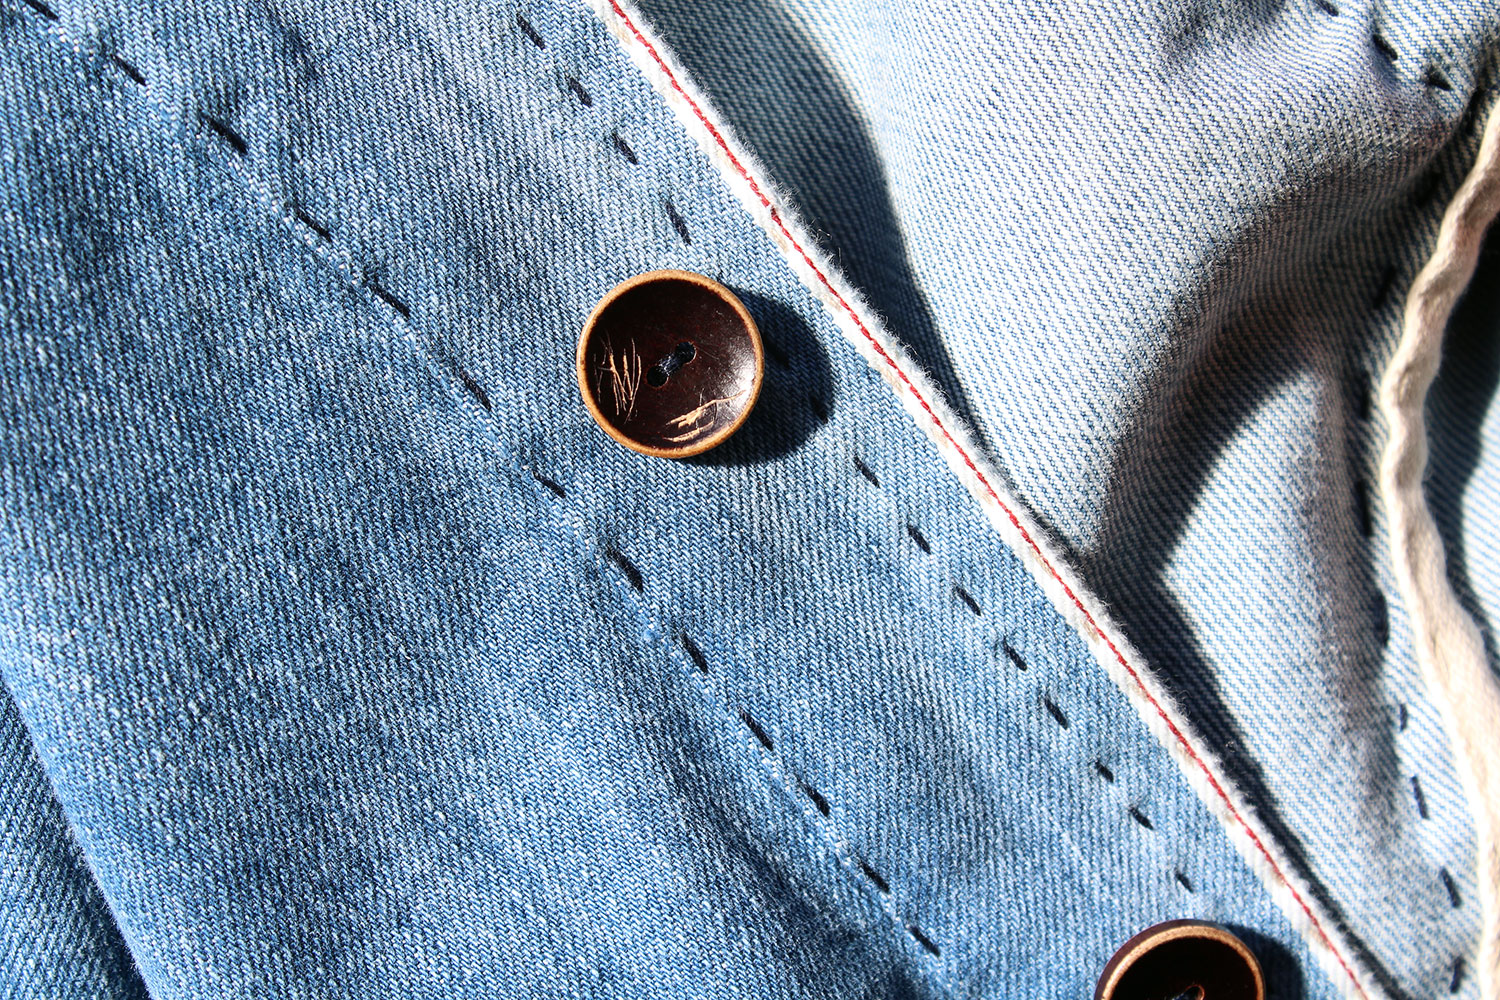 TheConcrete_WorkJacket_Washed_detail_02